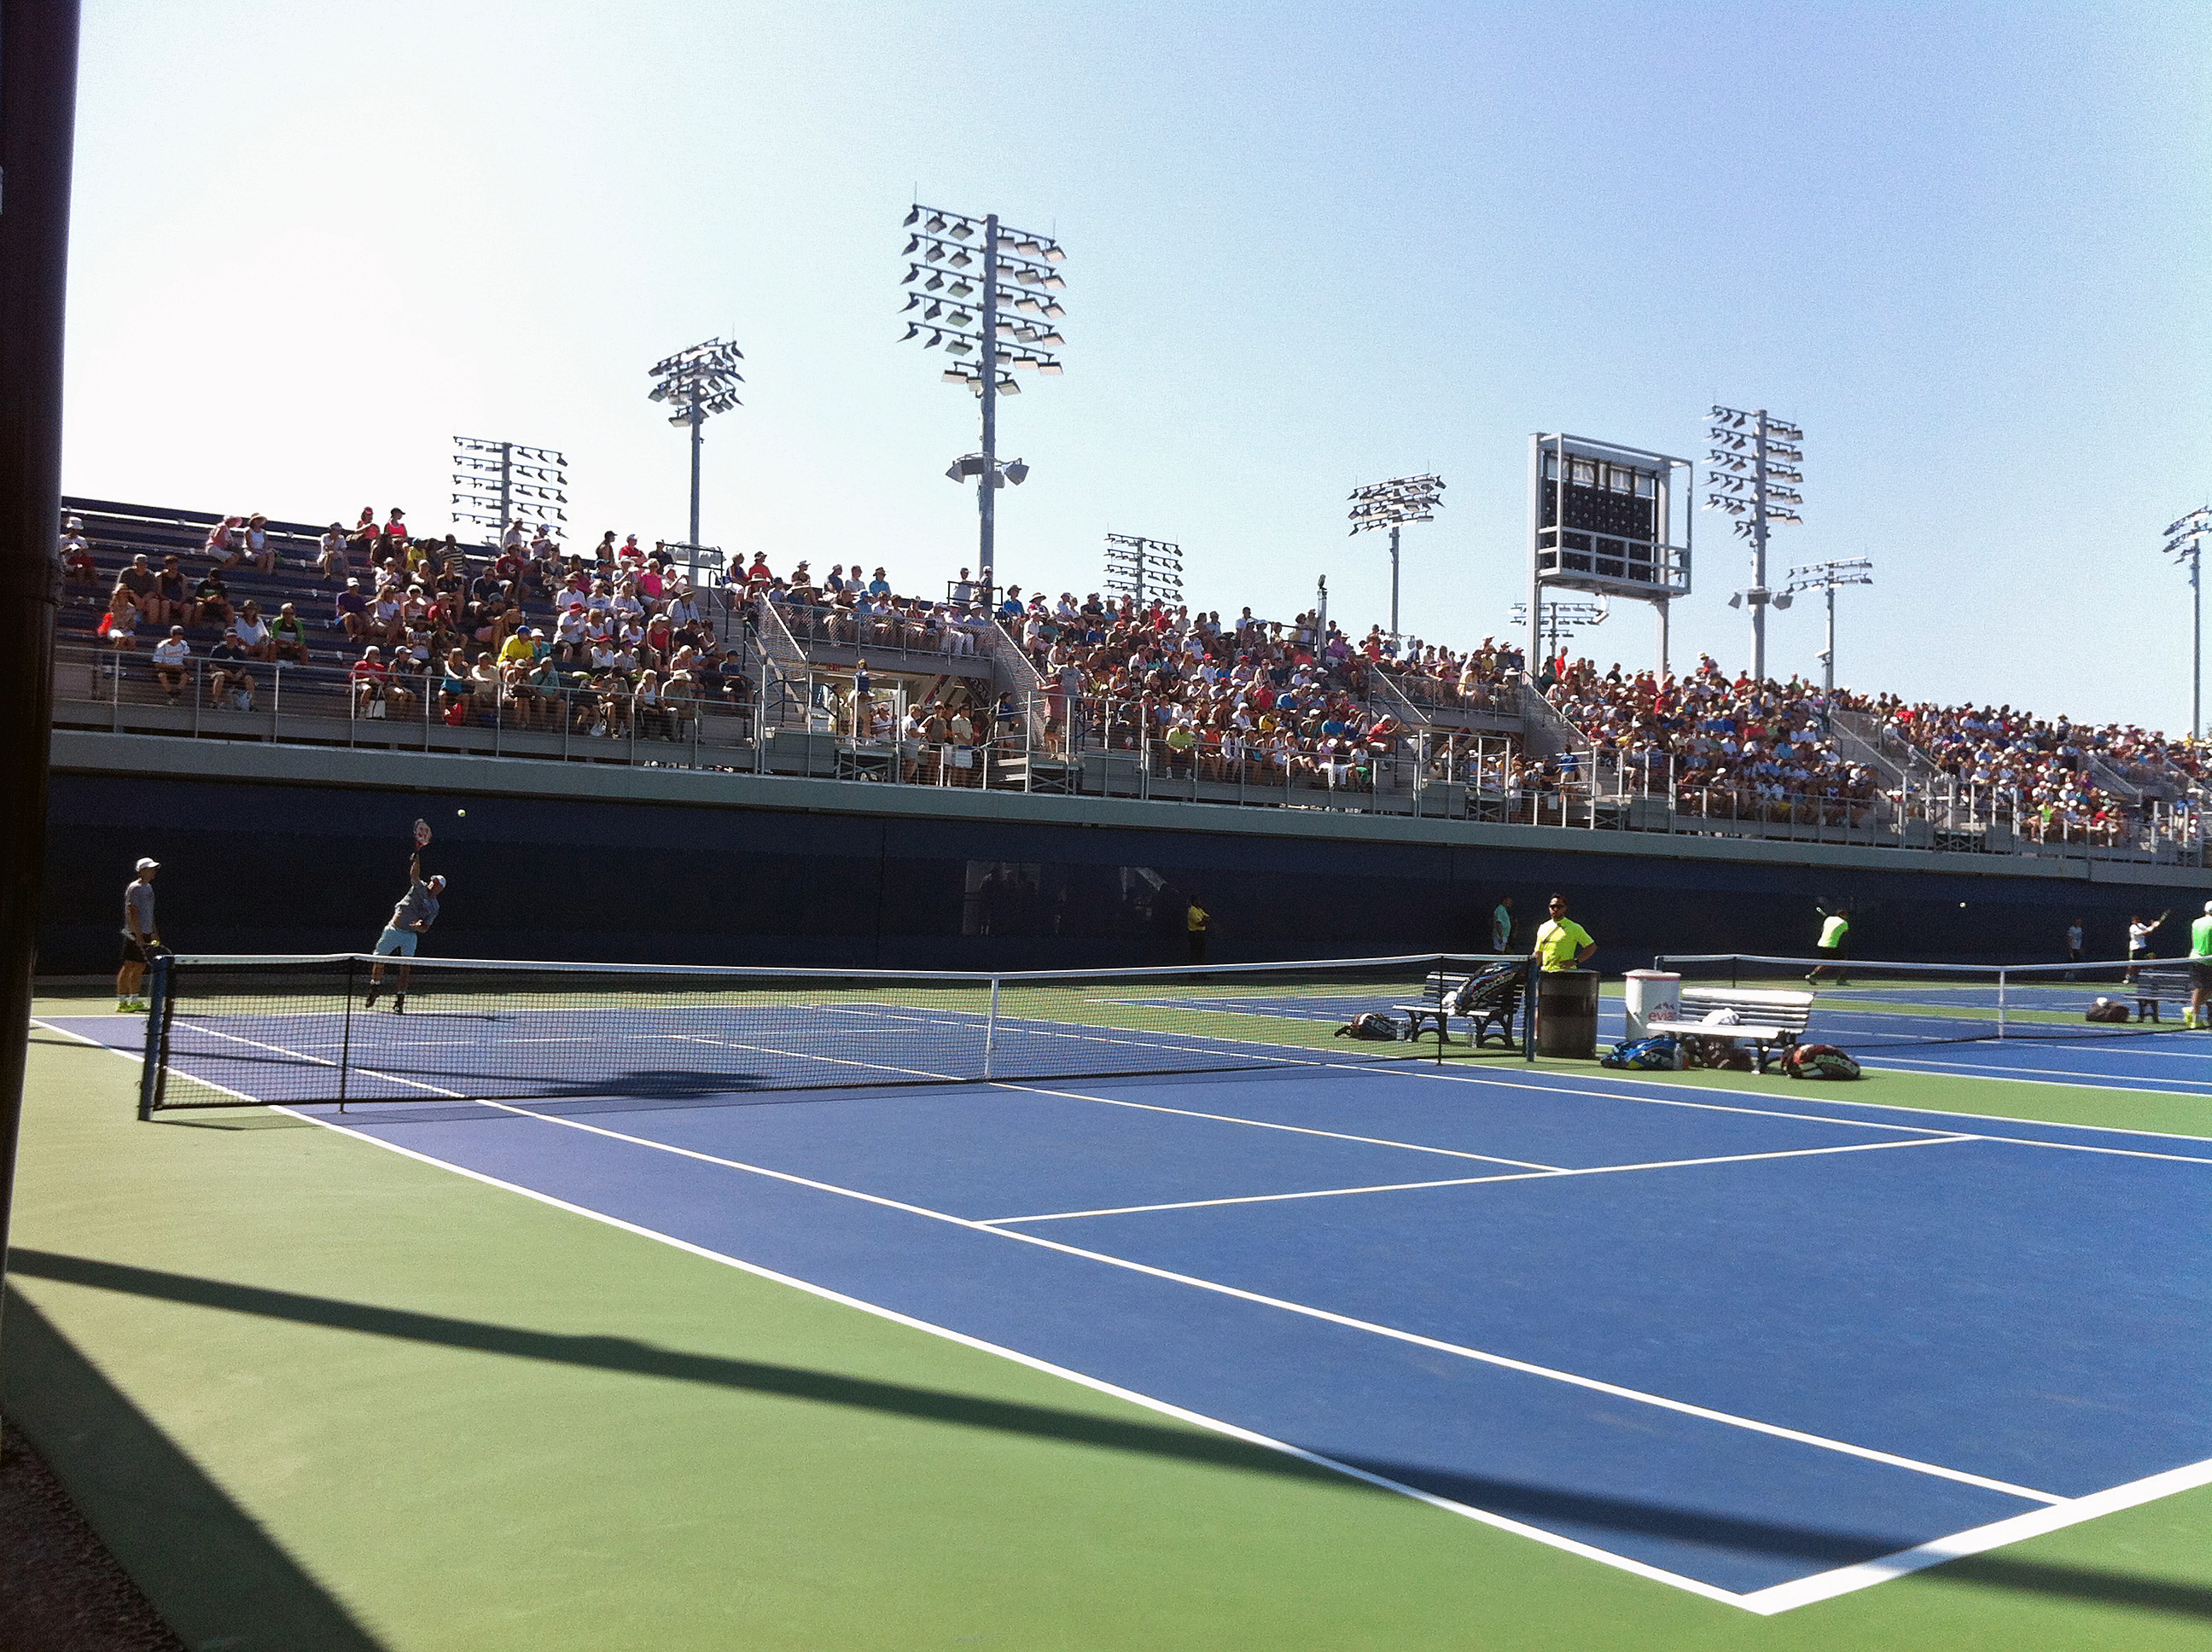 New at this year’s U.S. Open were elevated seating areas with views of the practice courts. 